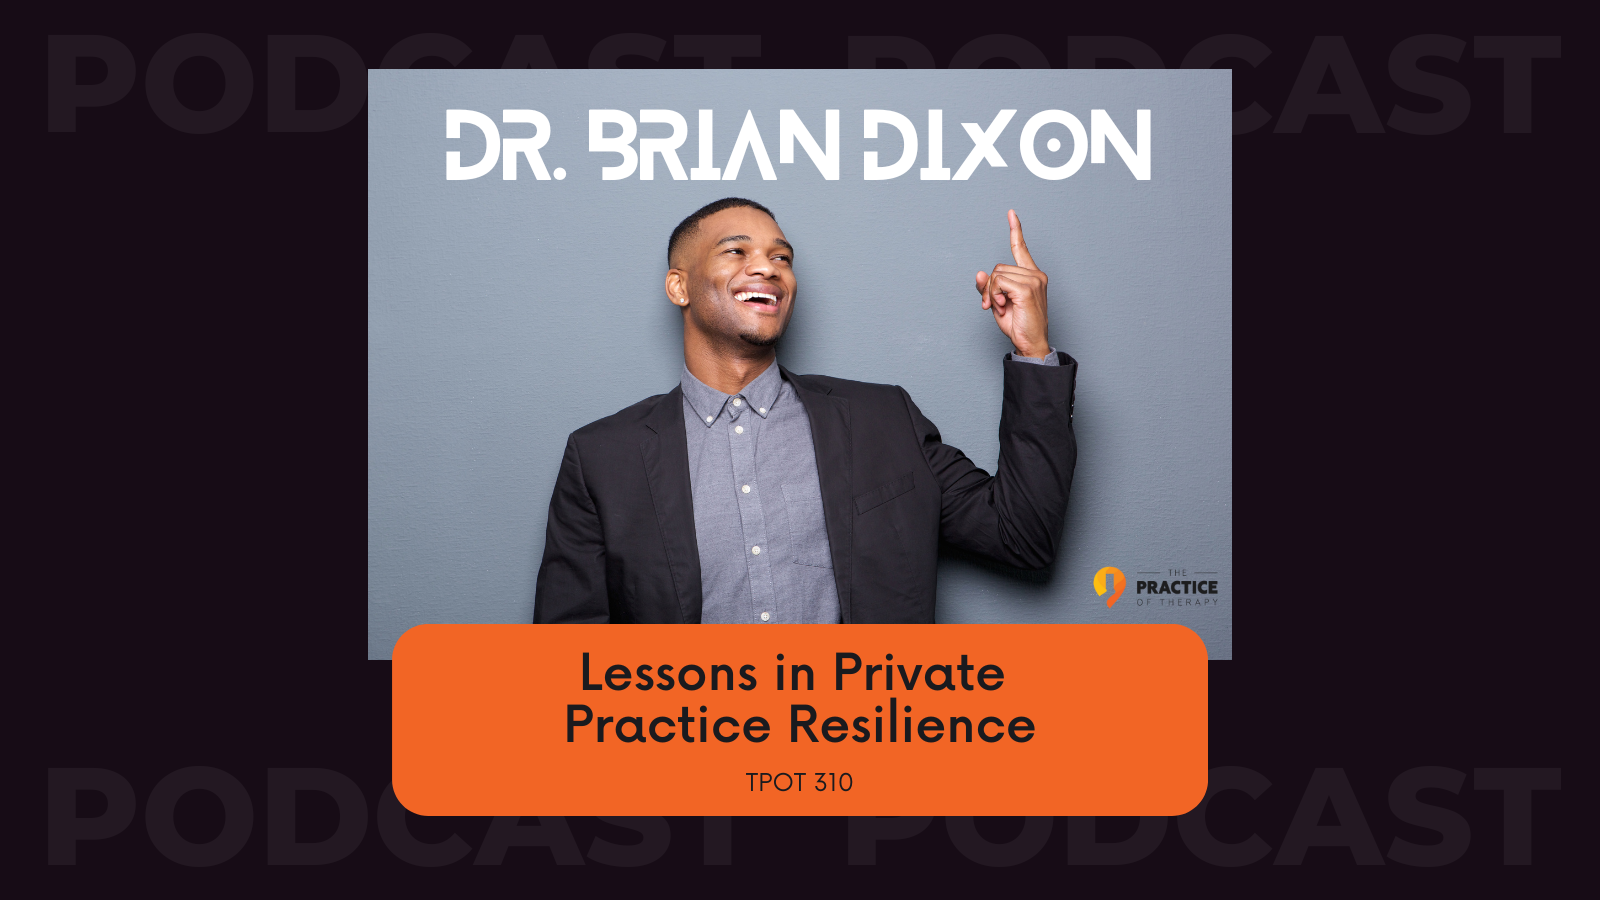 Dr. Brian Dixon Lessons in Private Practice Resilience TPOT 310_